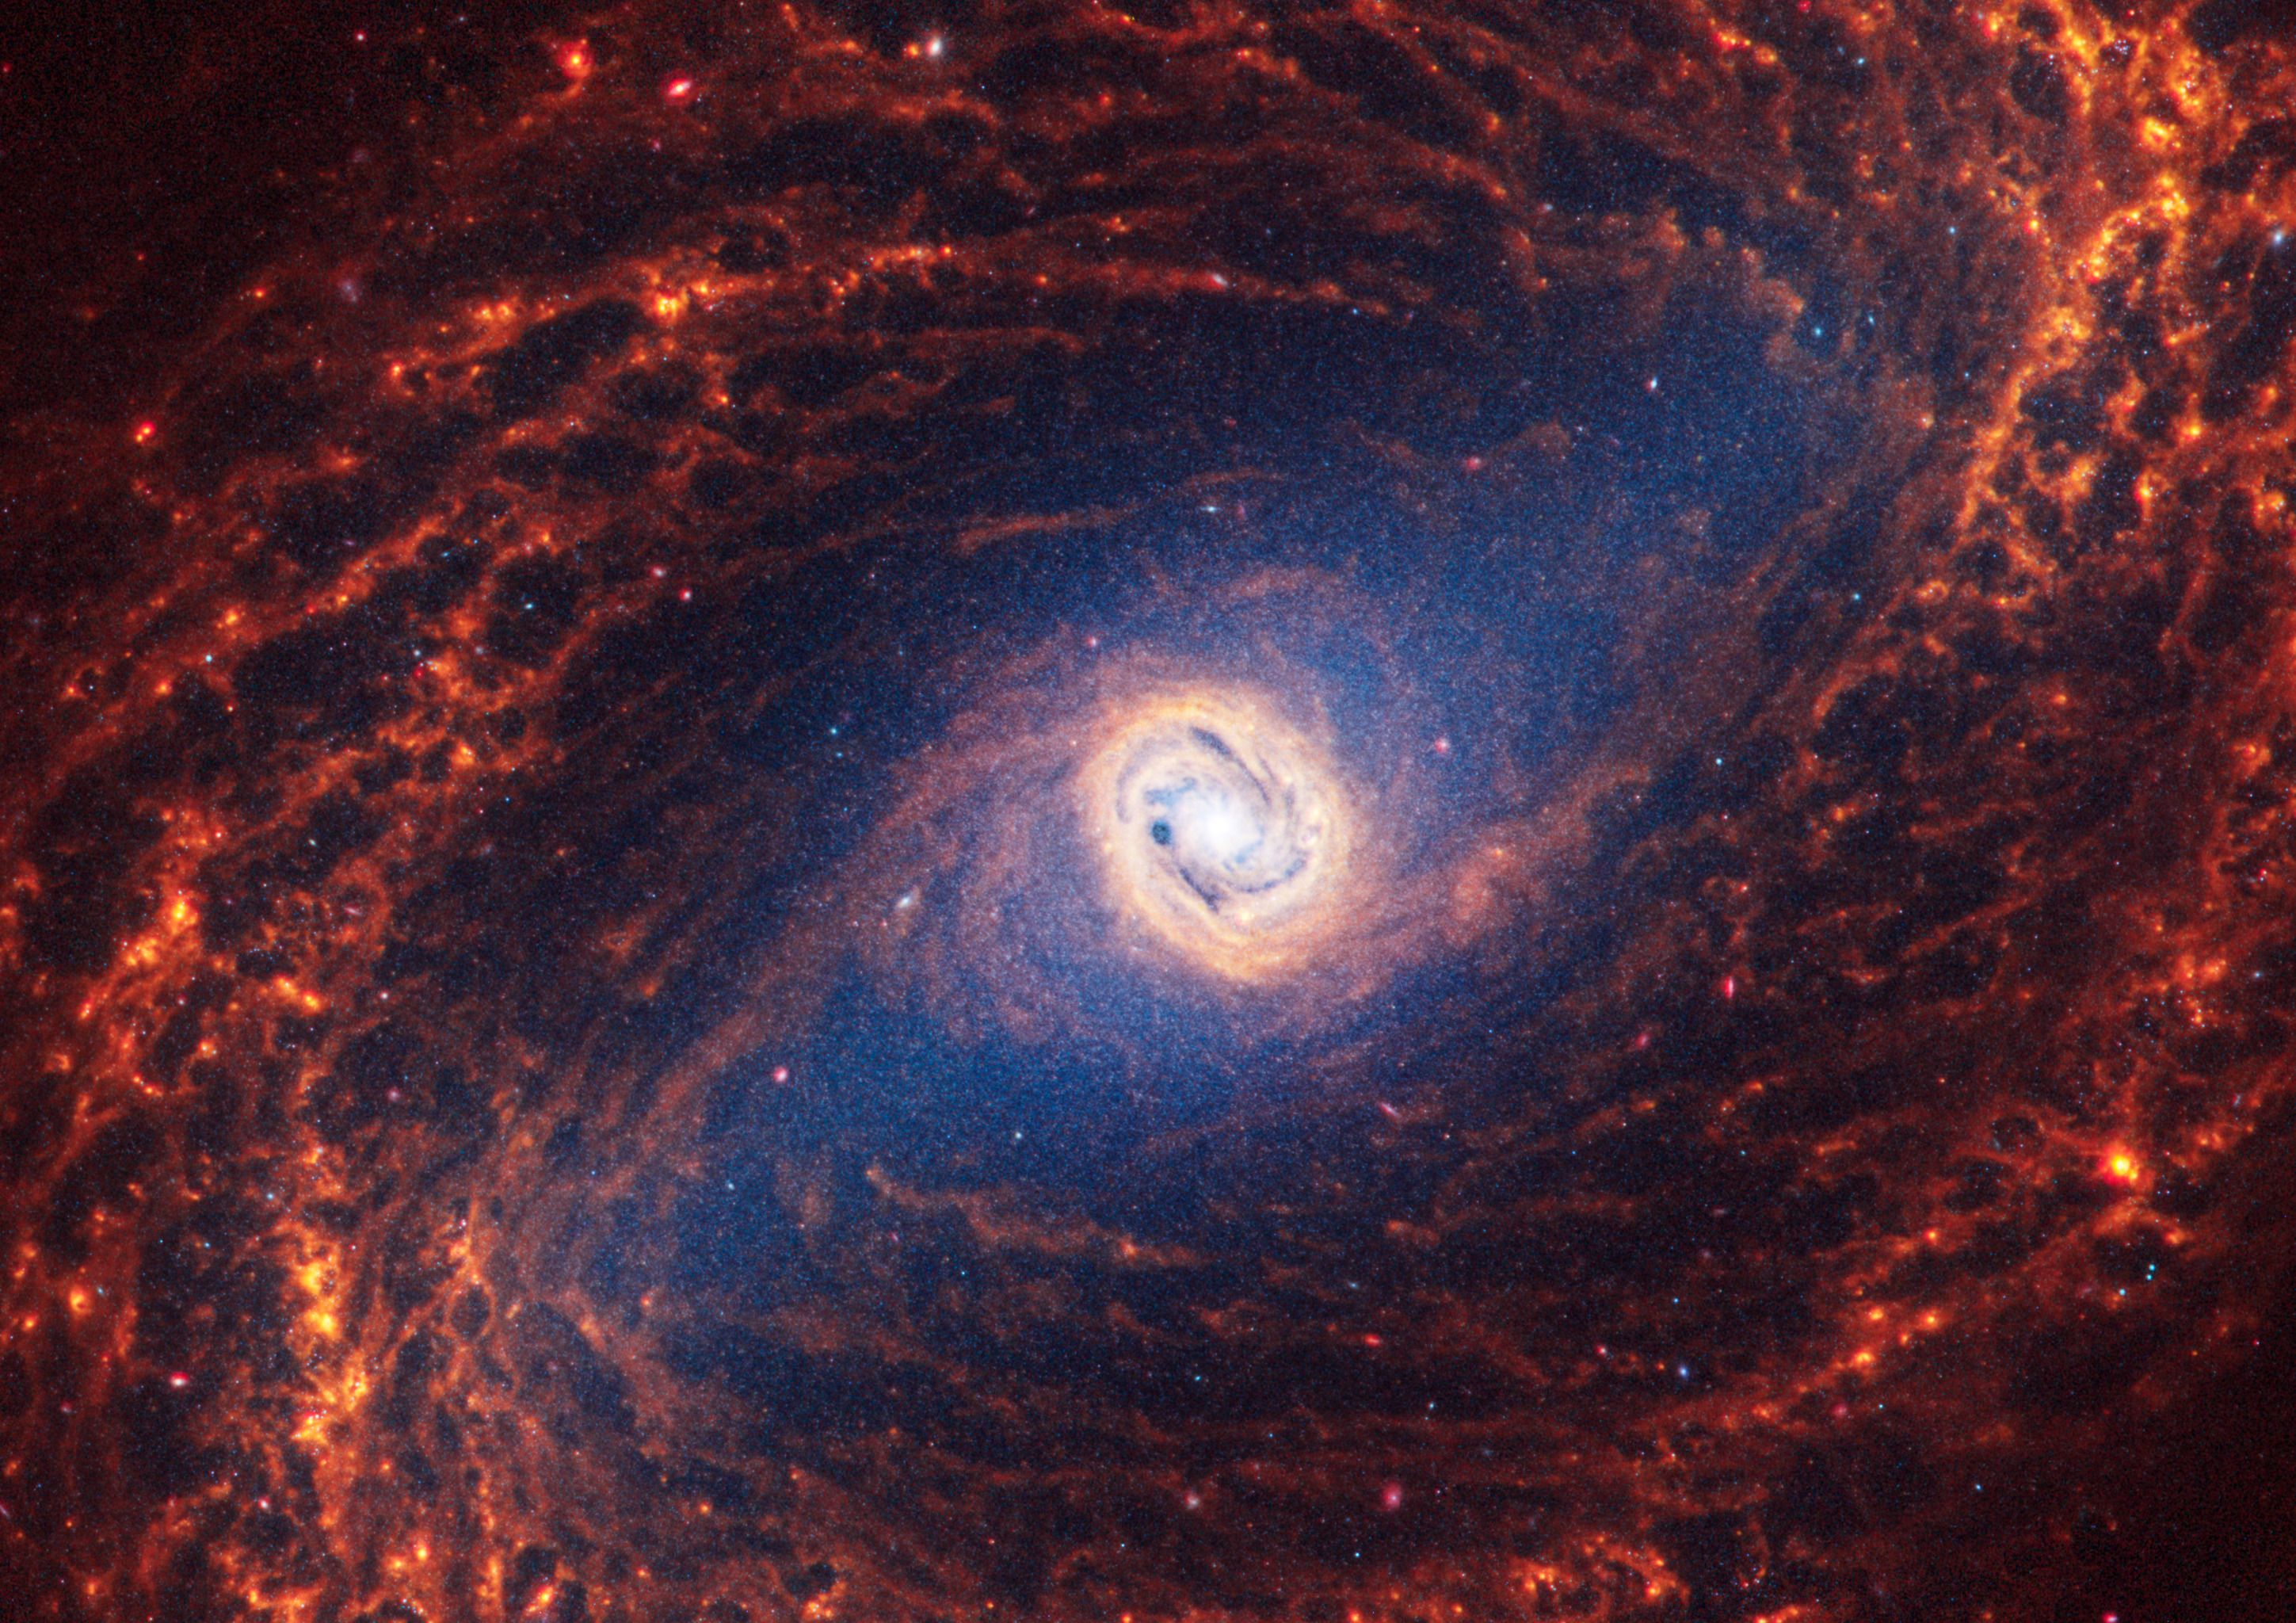 NGC 1433 is 46 million light-years away in the constellation Horologium.